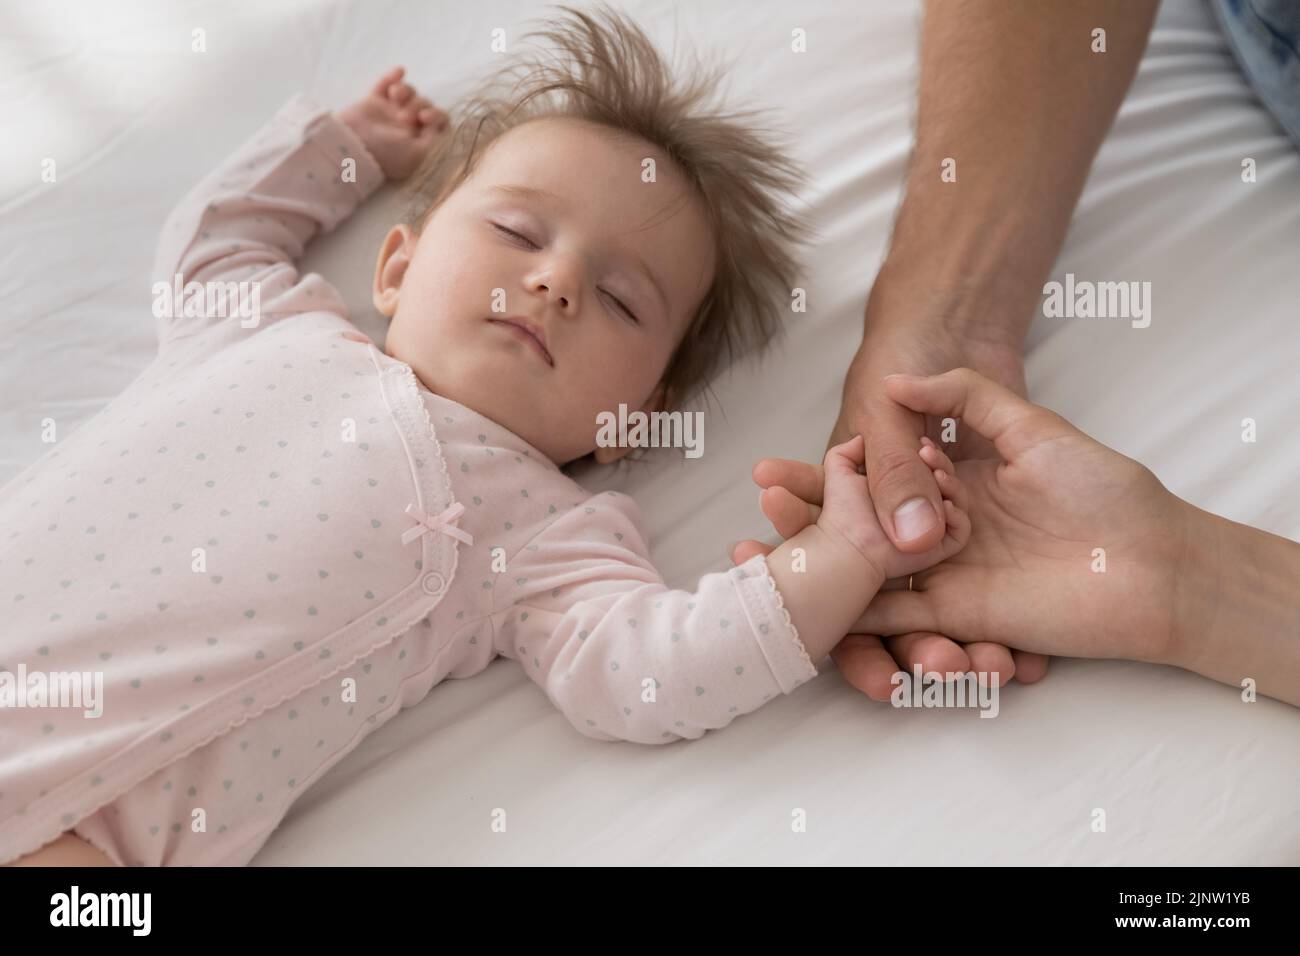 Cute newborn sleeping on bed touch loving parents hands Stock Photo